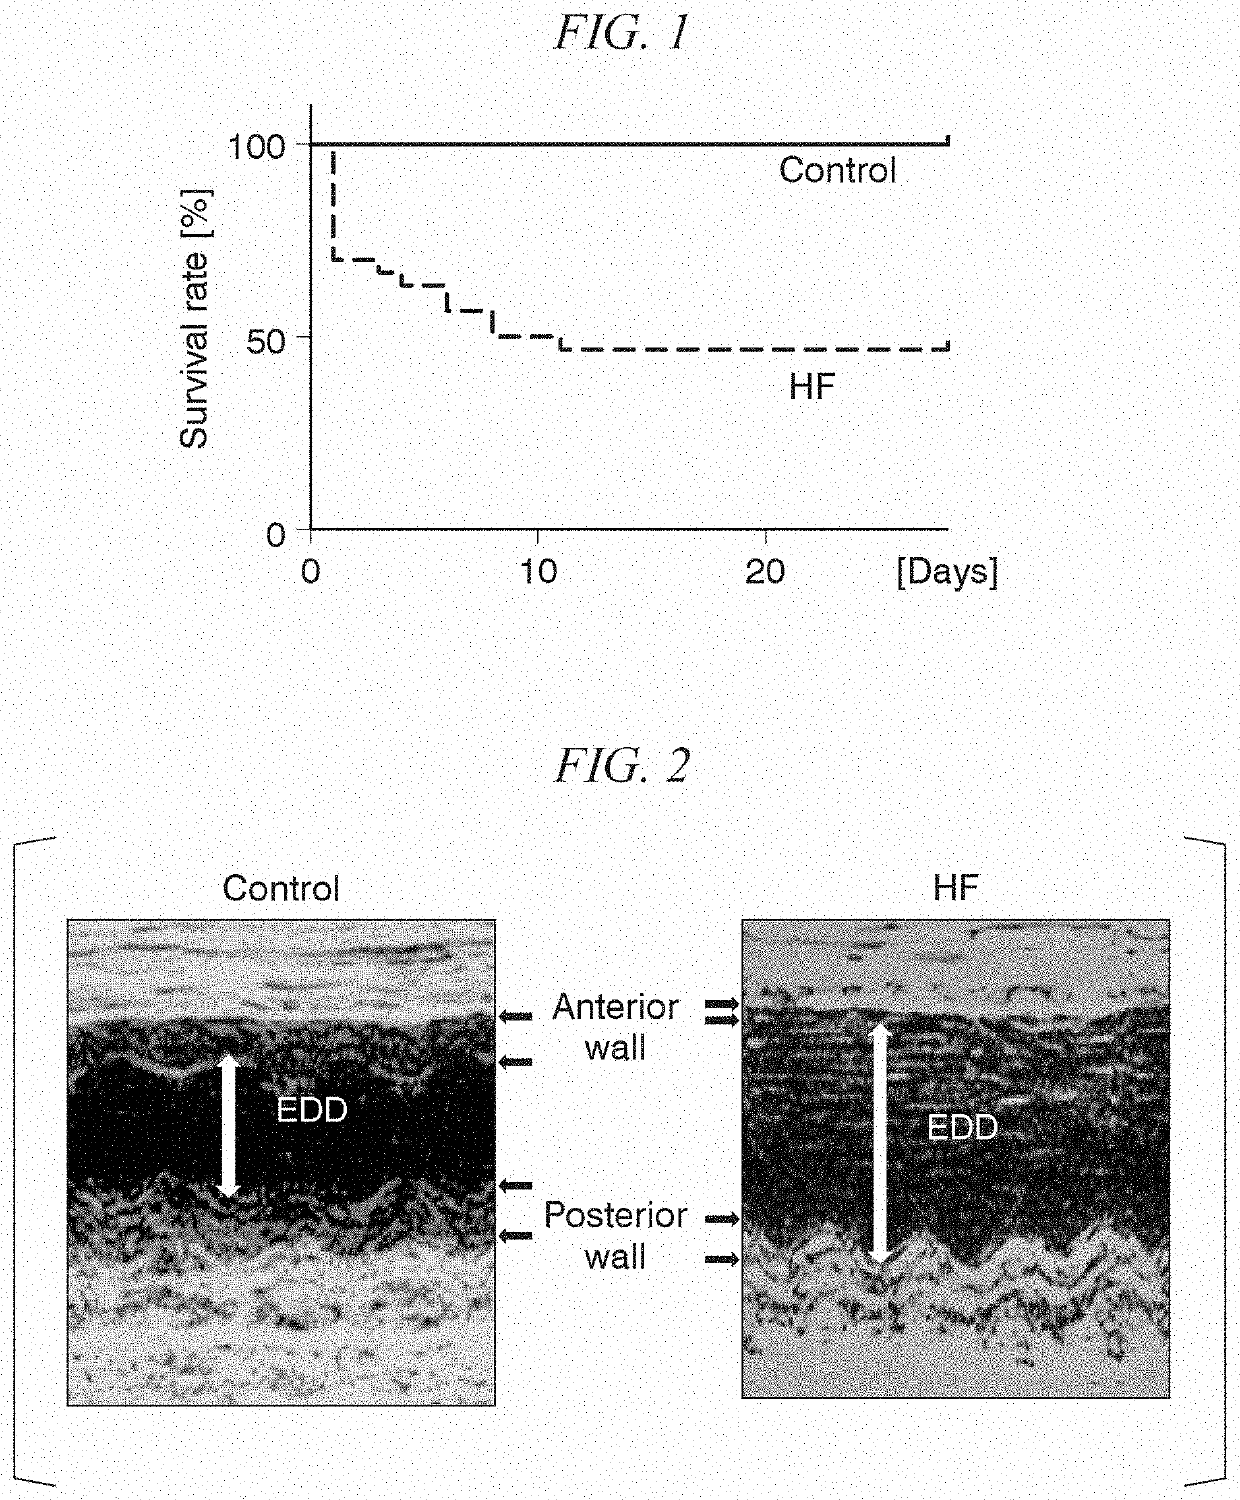 Method of evaluating pathological conditions of heart failure